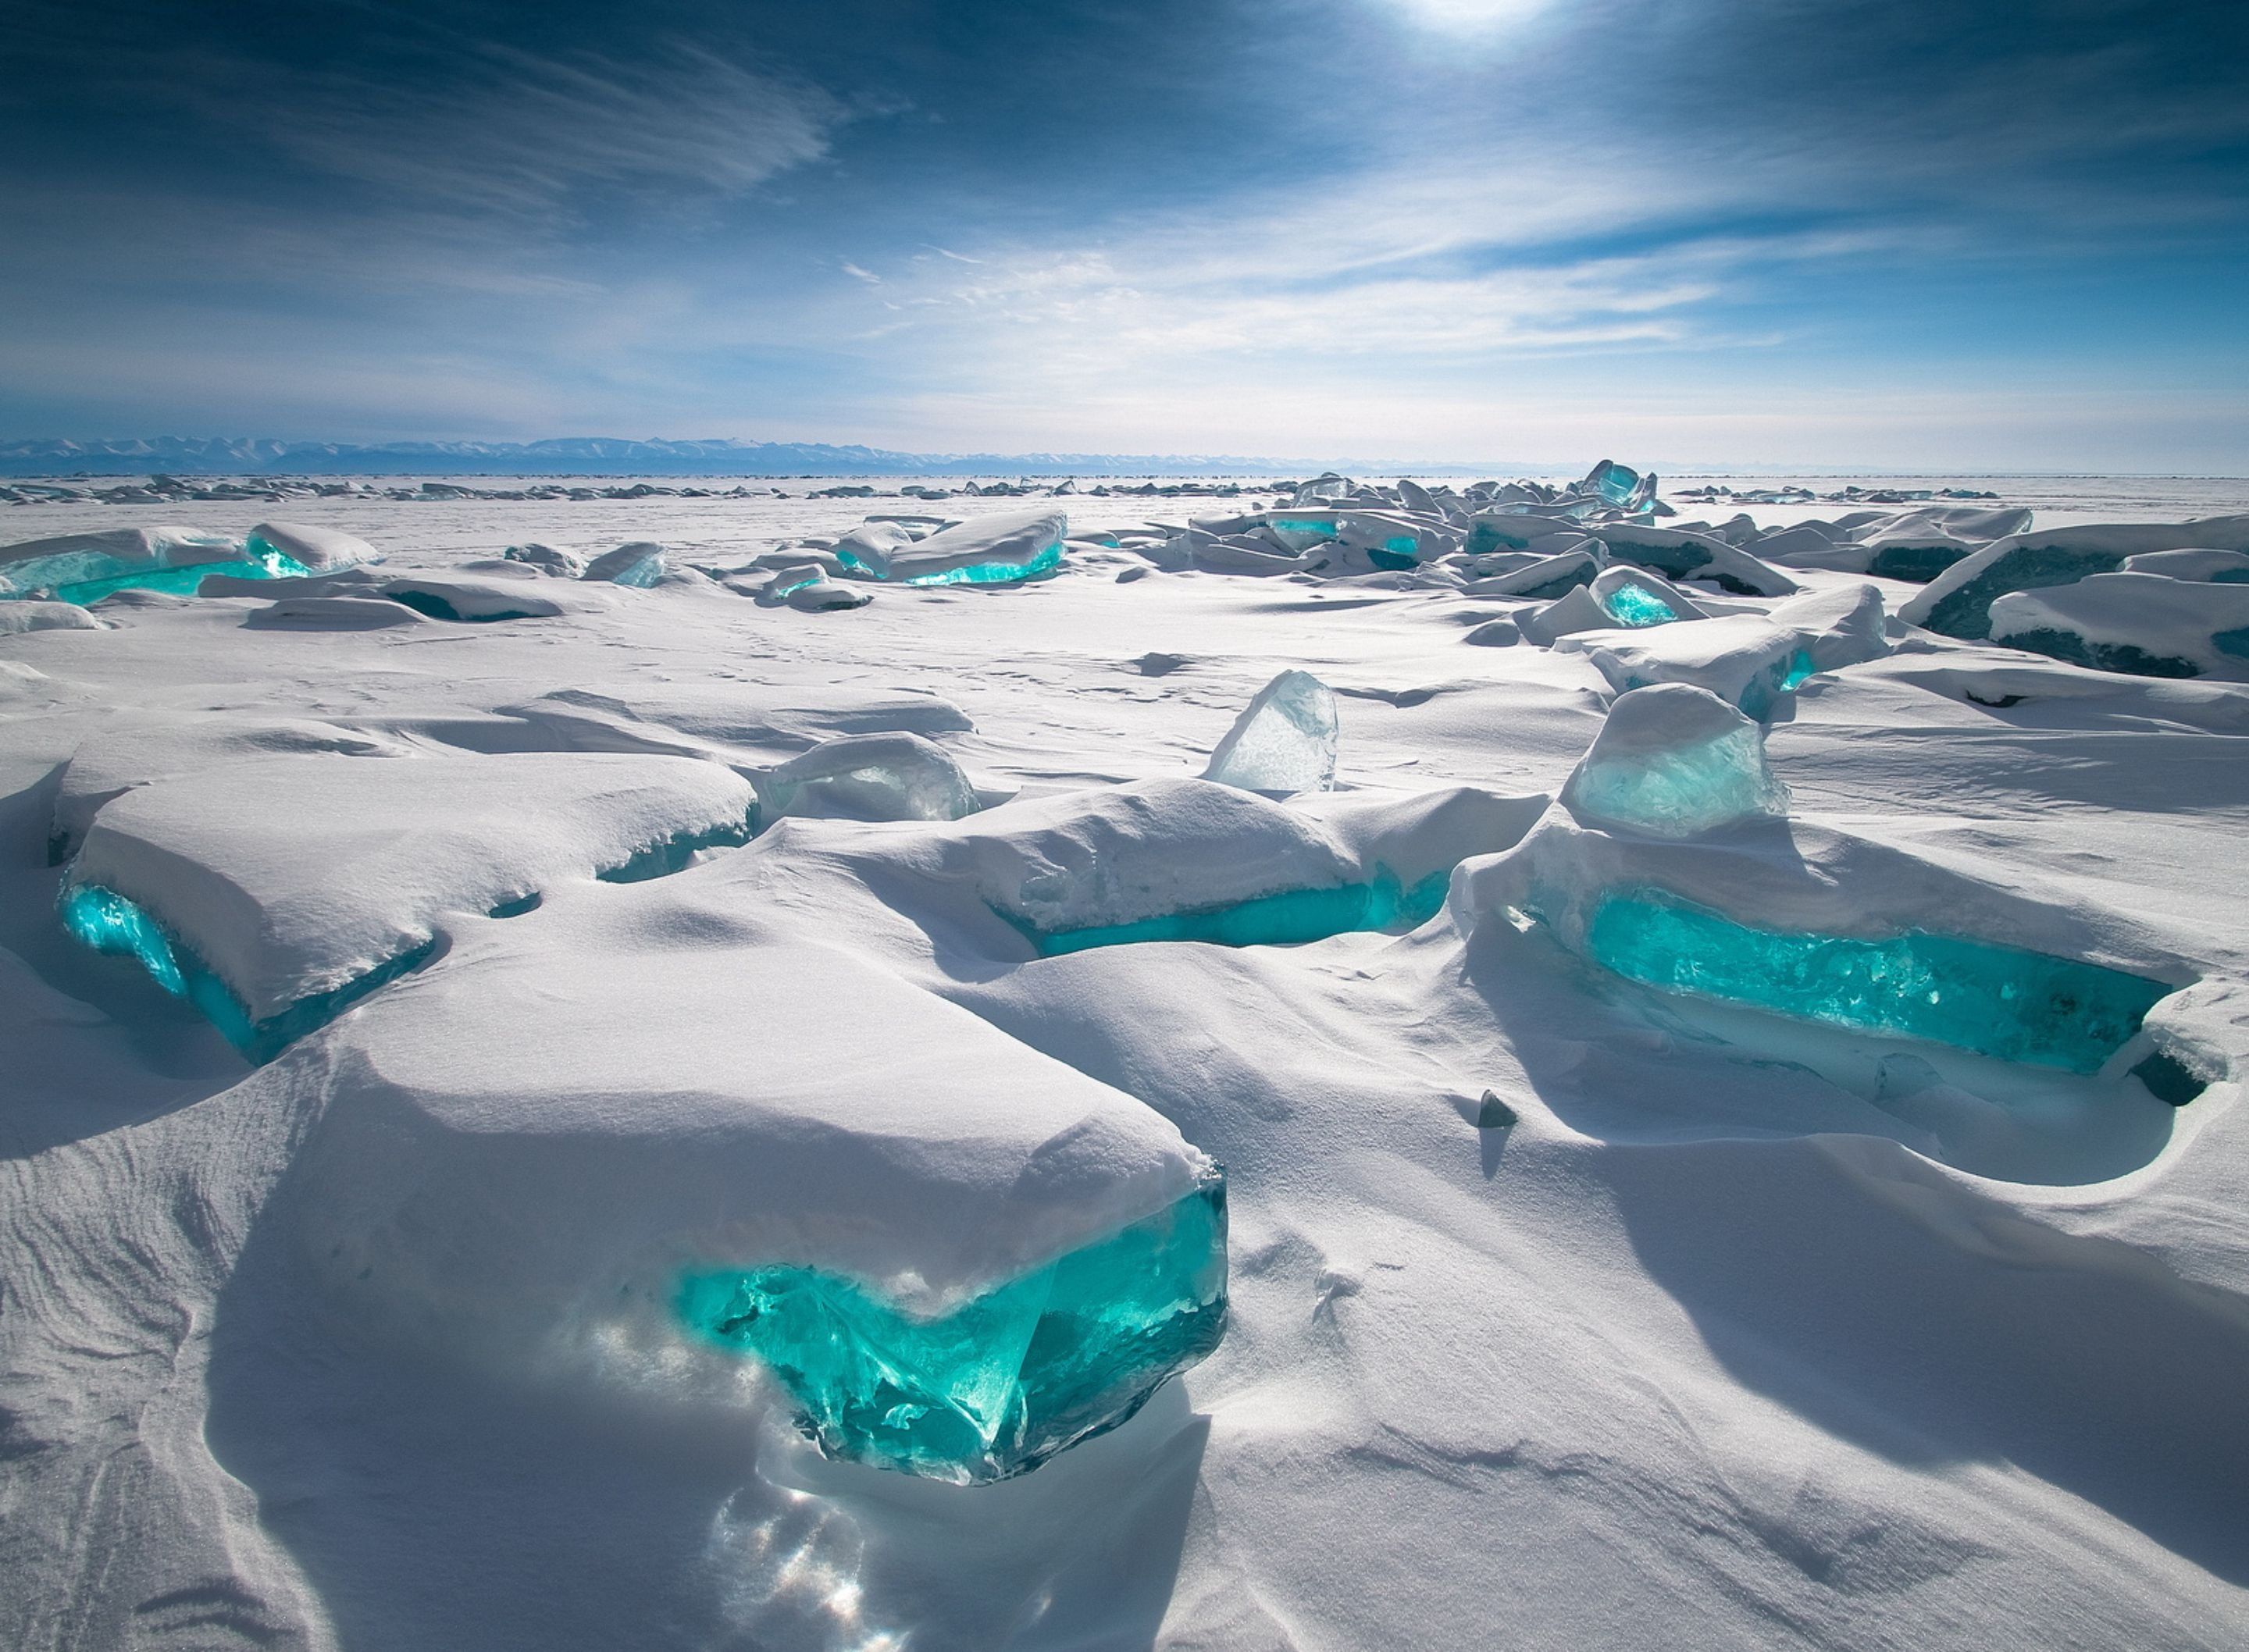 Baikal 4K wallpapers for your desktop or mobile screen free and